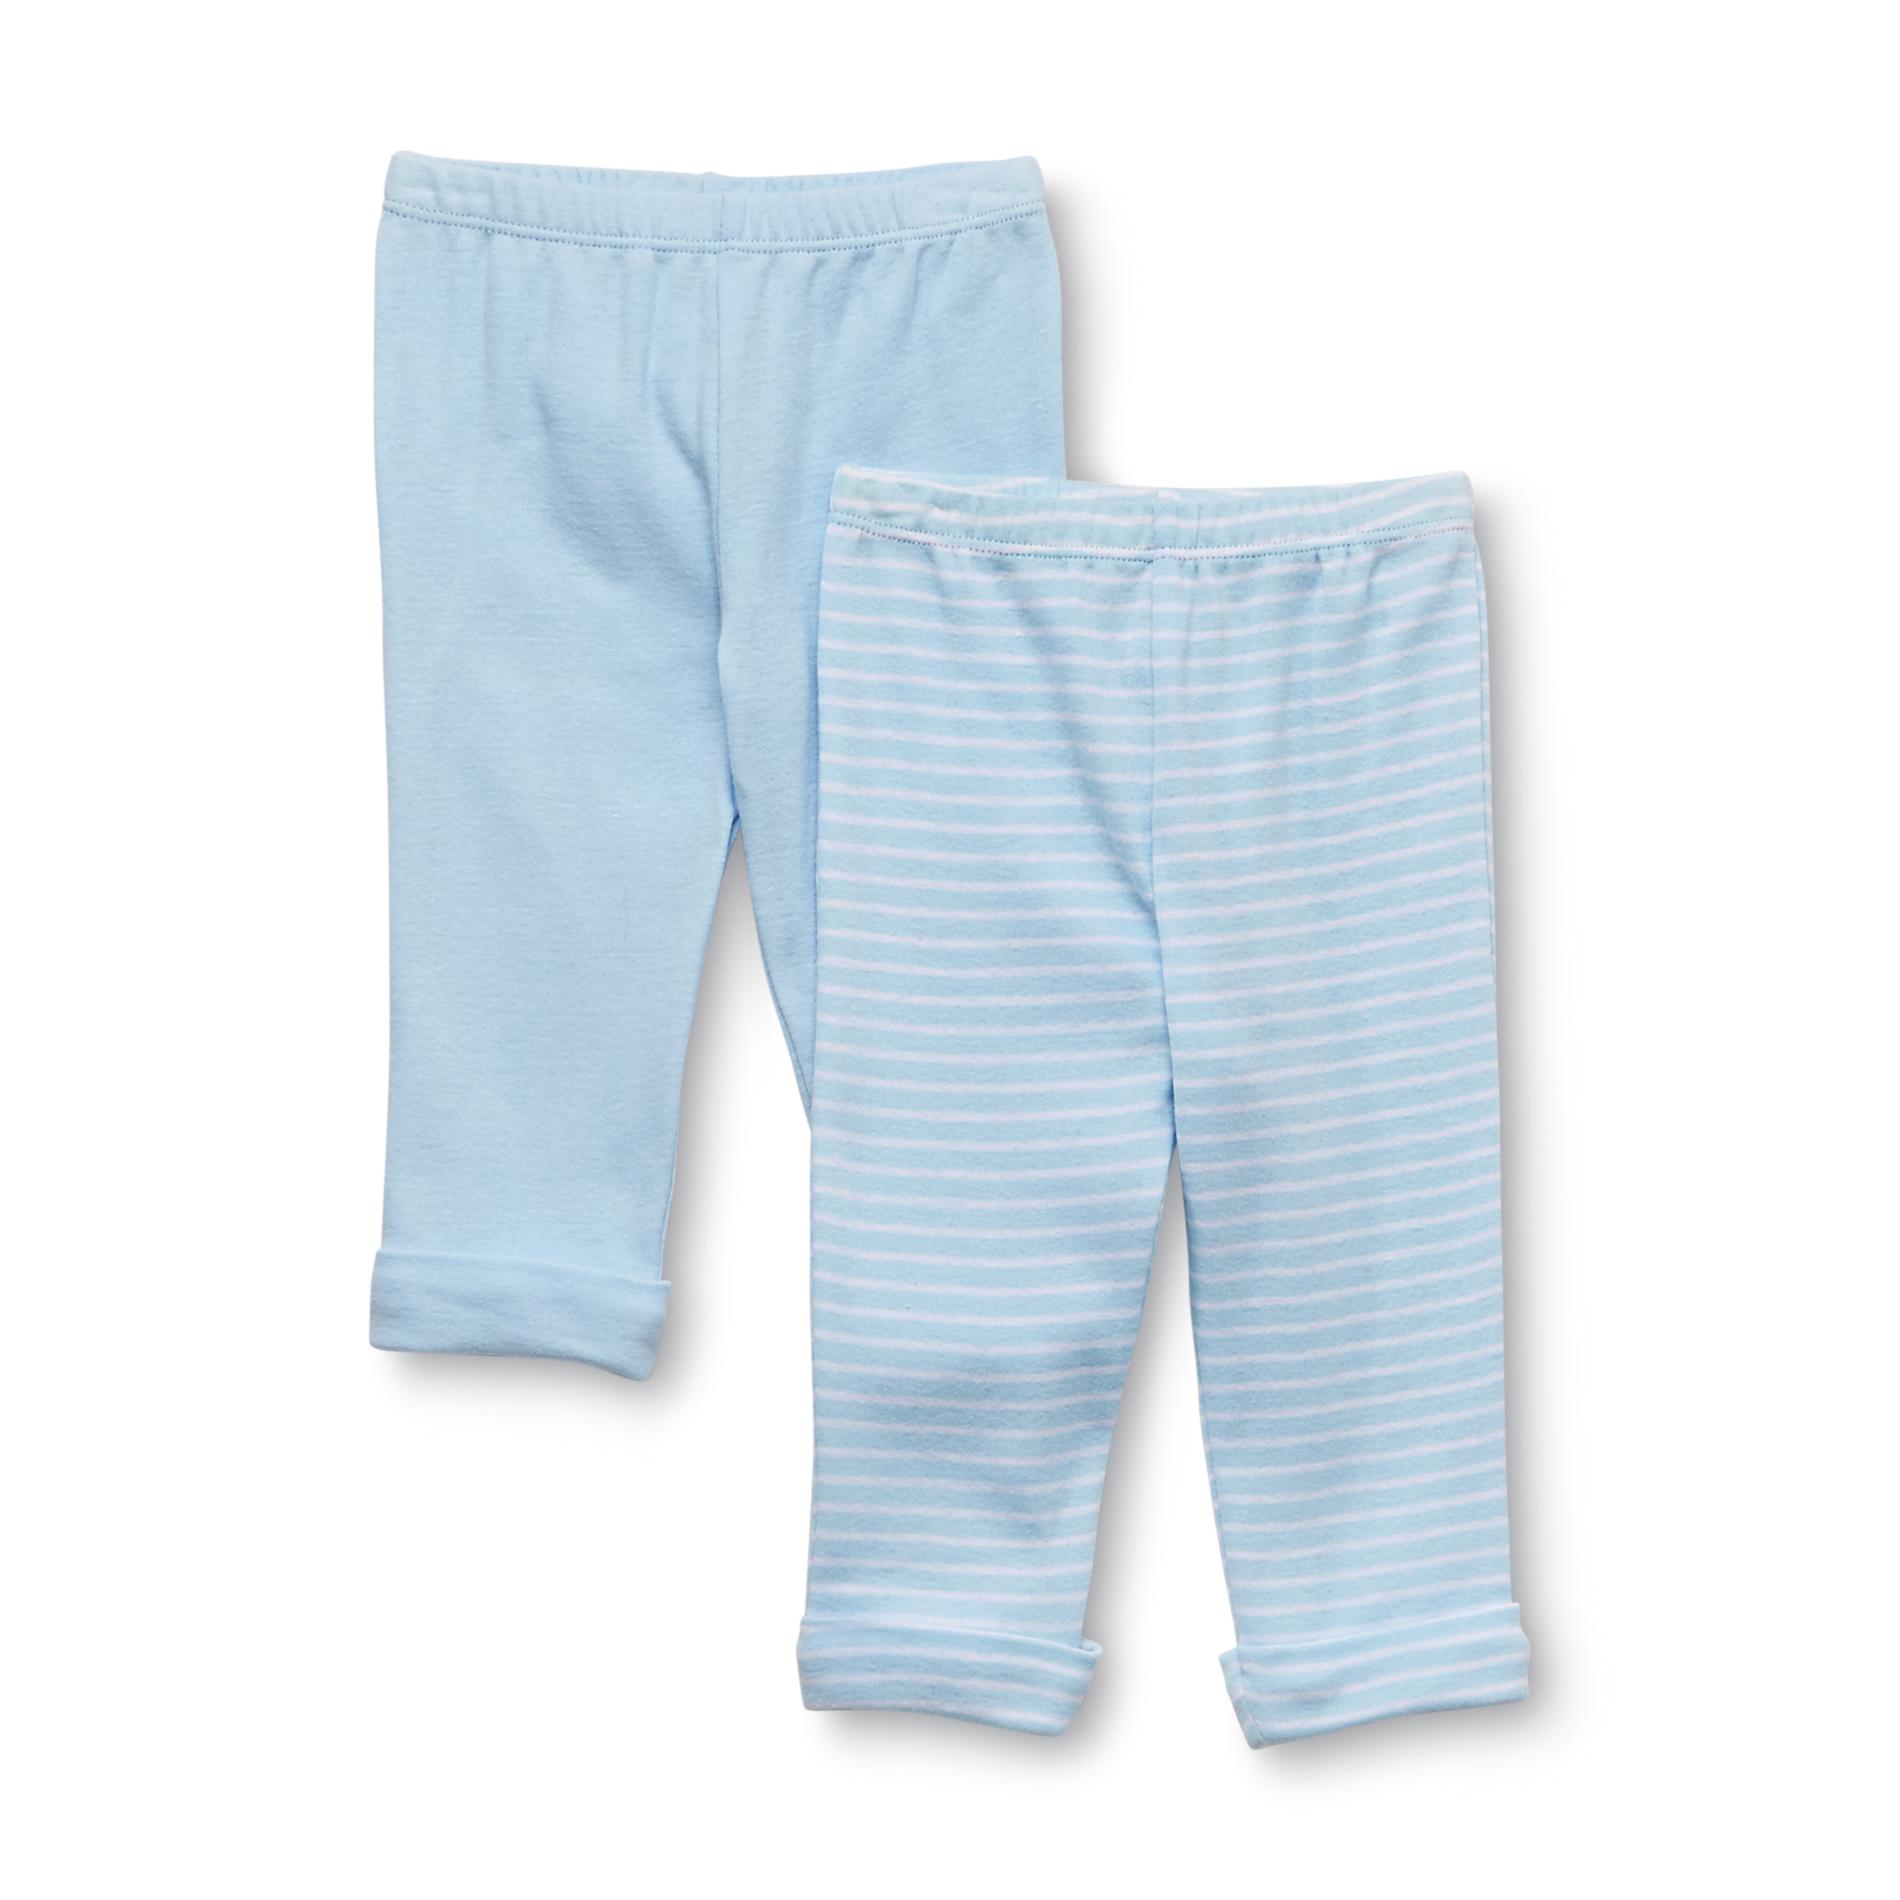 Welcome to the World Newborn Boy's 2-Pack Jersey Knit Pants - Striped